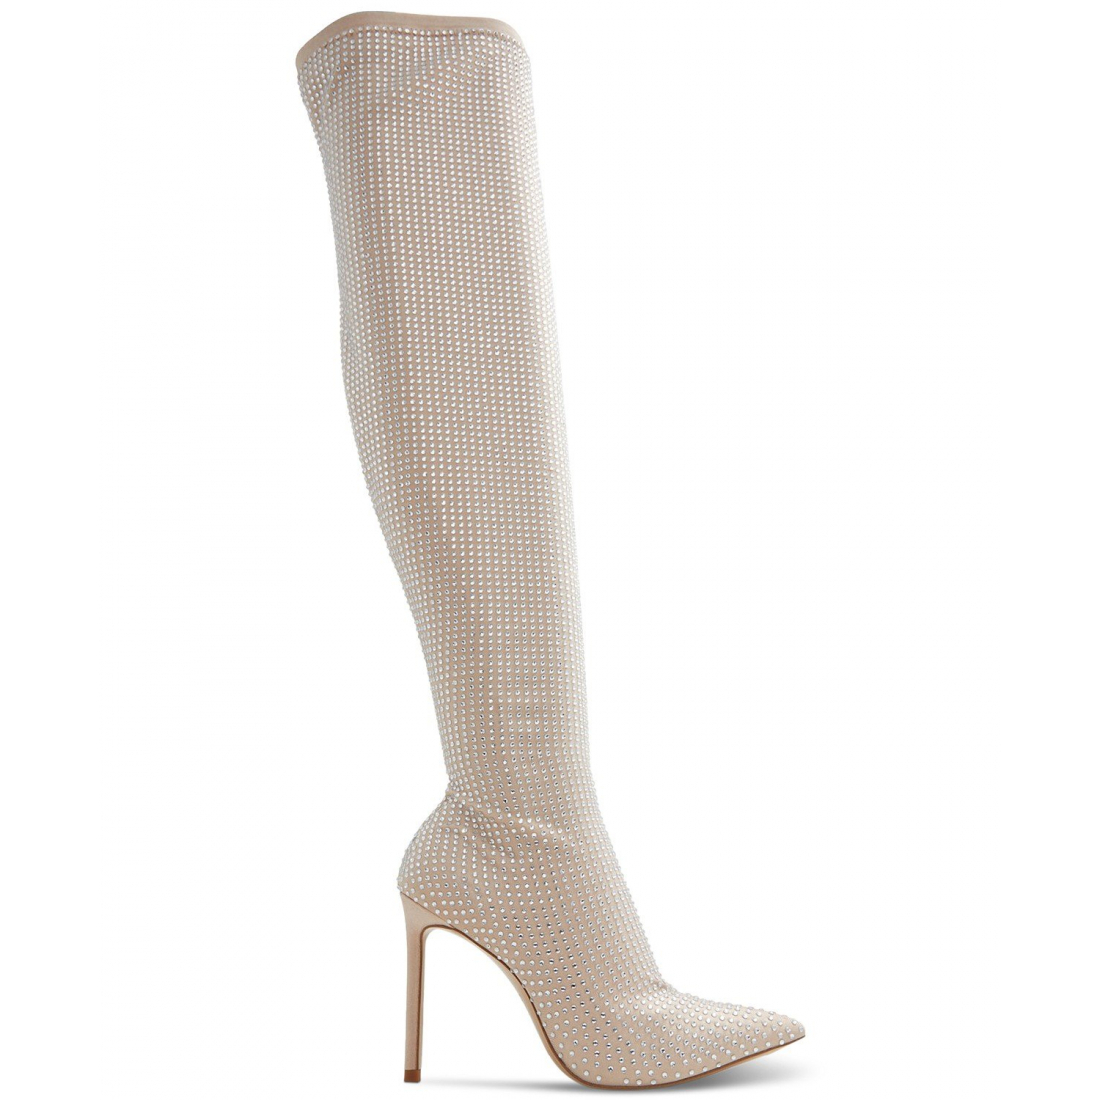 Women's 'Nassia Pull-On Dress' Over the knee boots